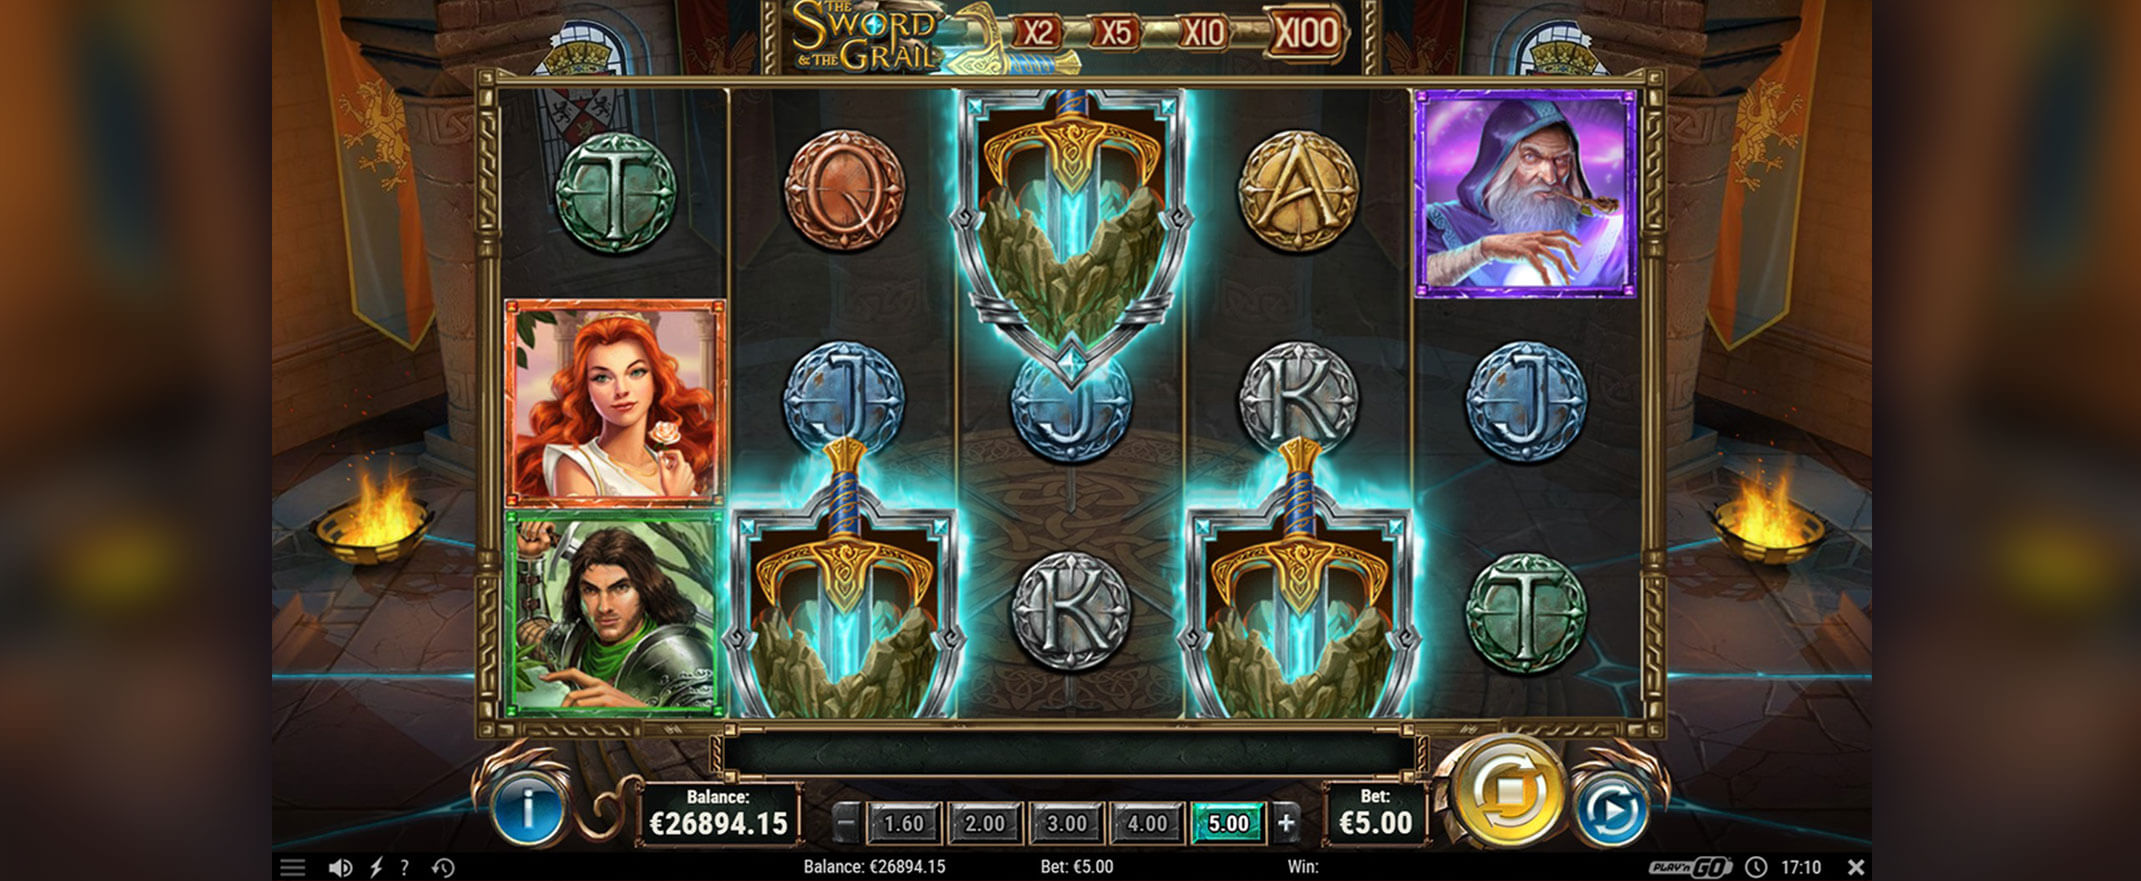 The Sword and The Grail free spins